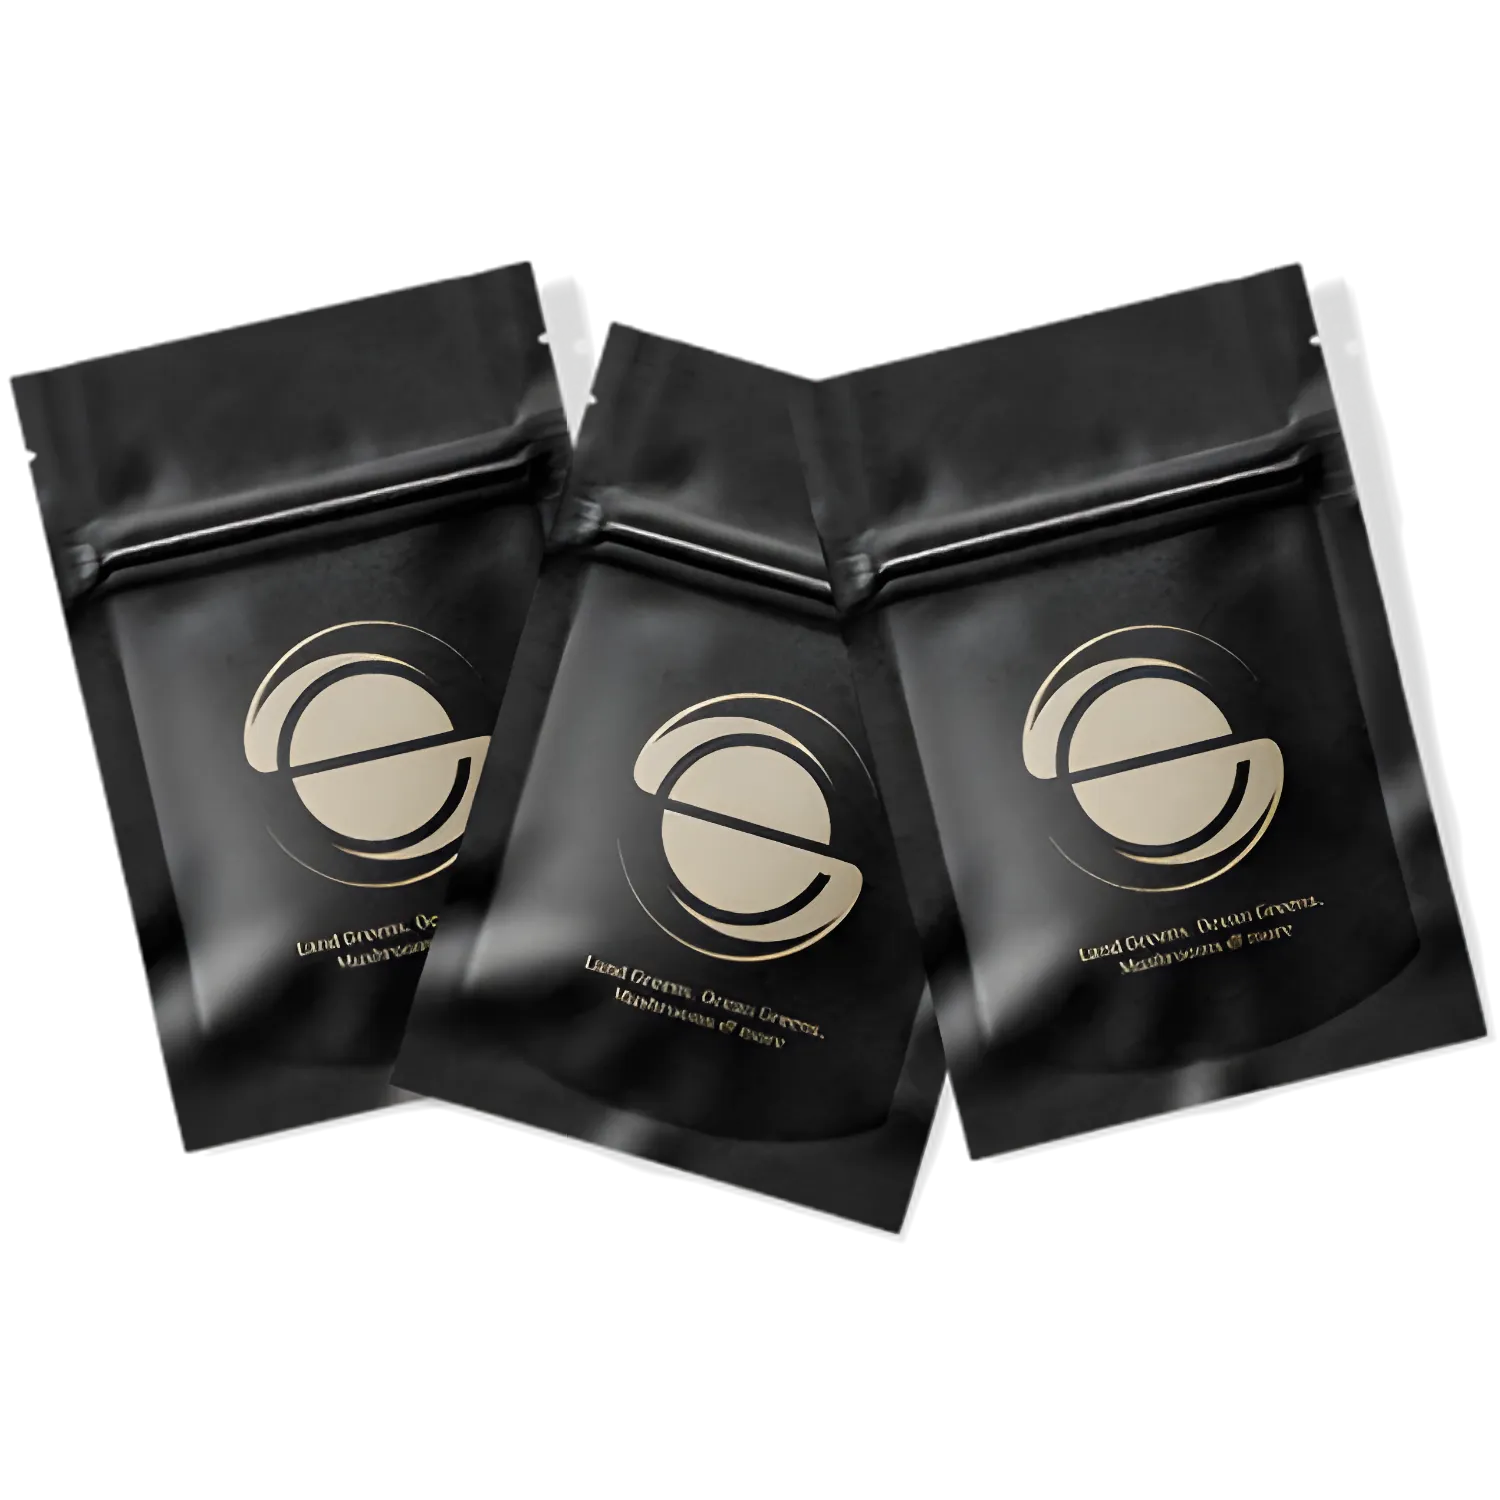 Free Earth Powder Top-Notch Supplement